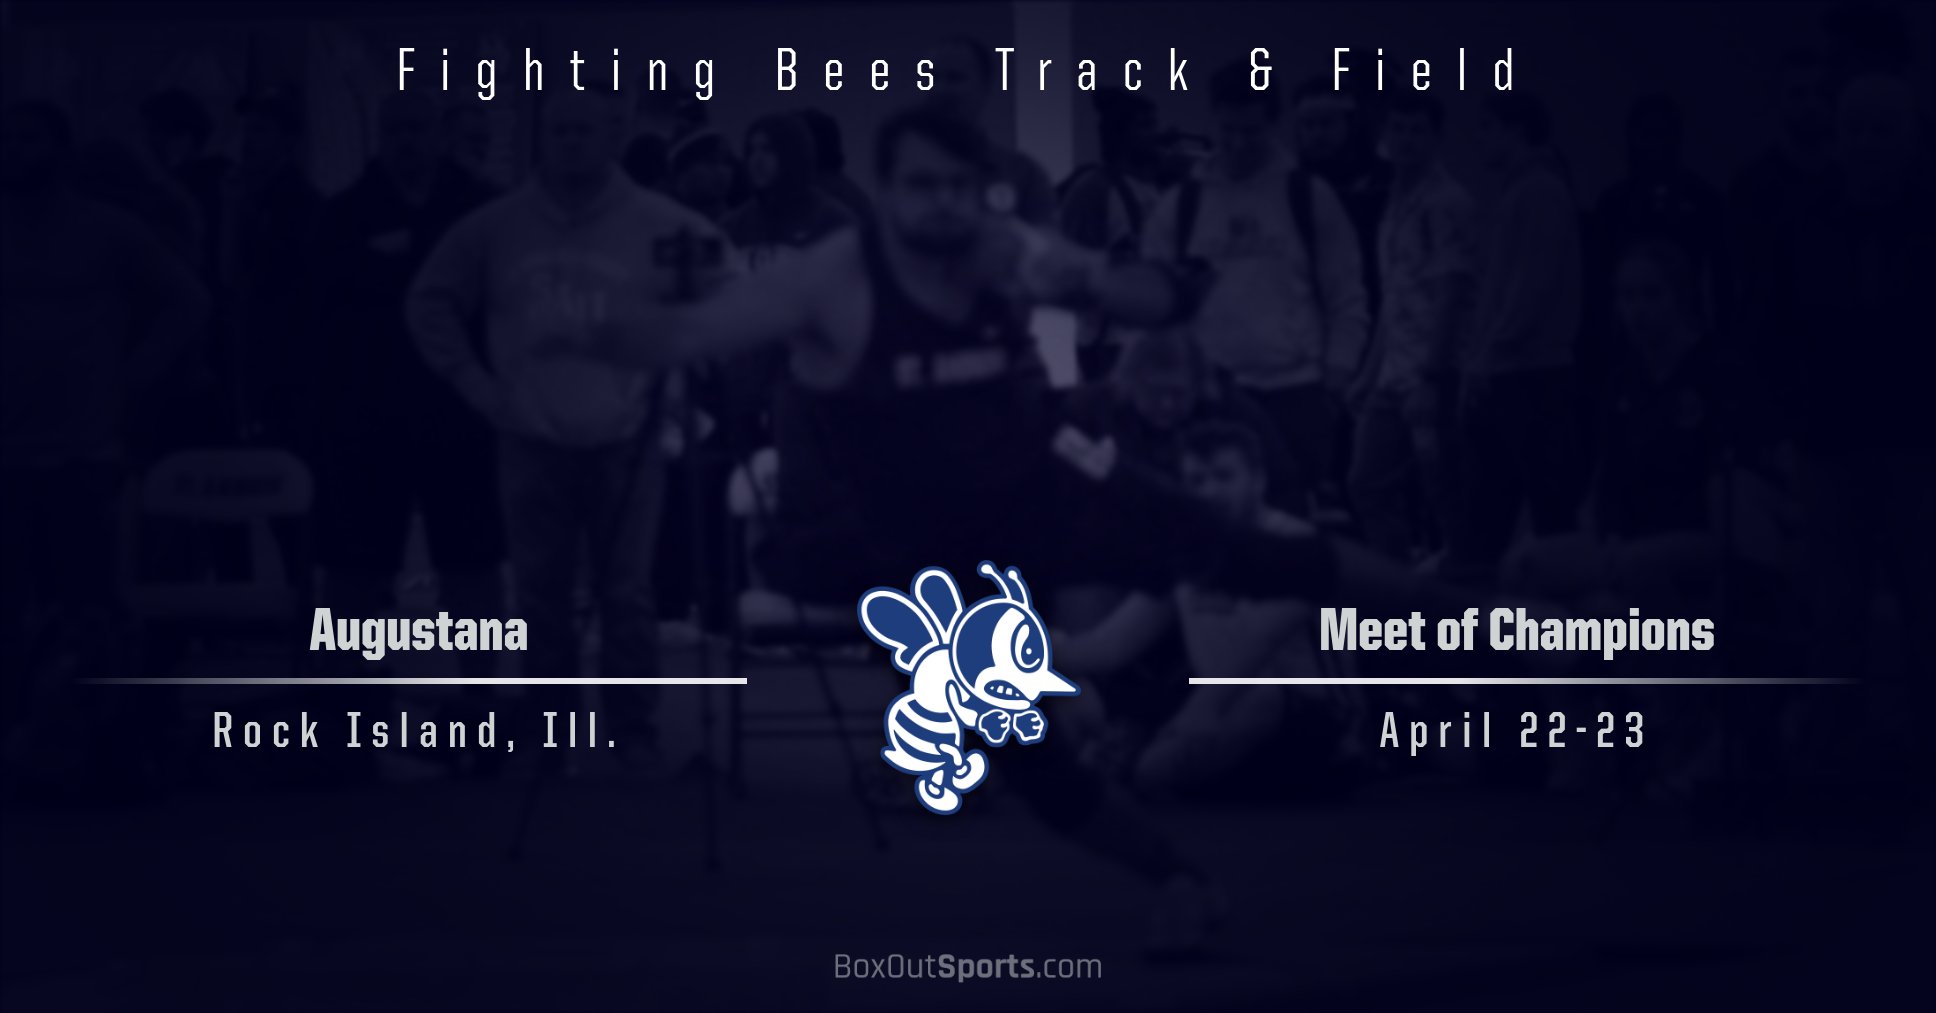 Another strong showing for Bees at Meet of Champions